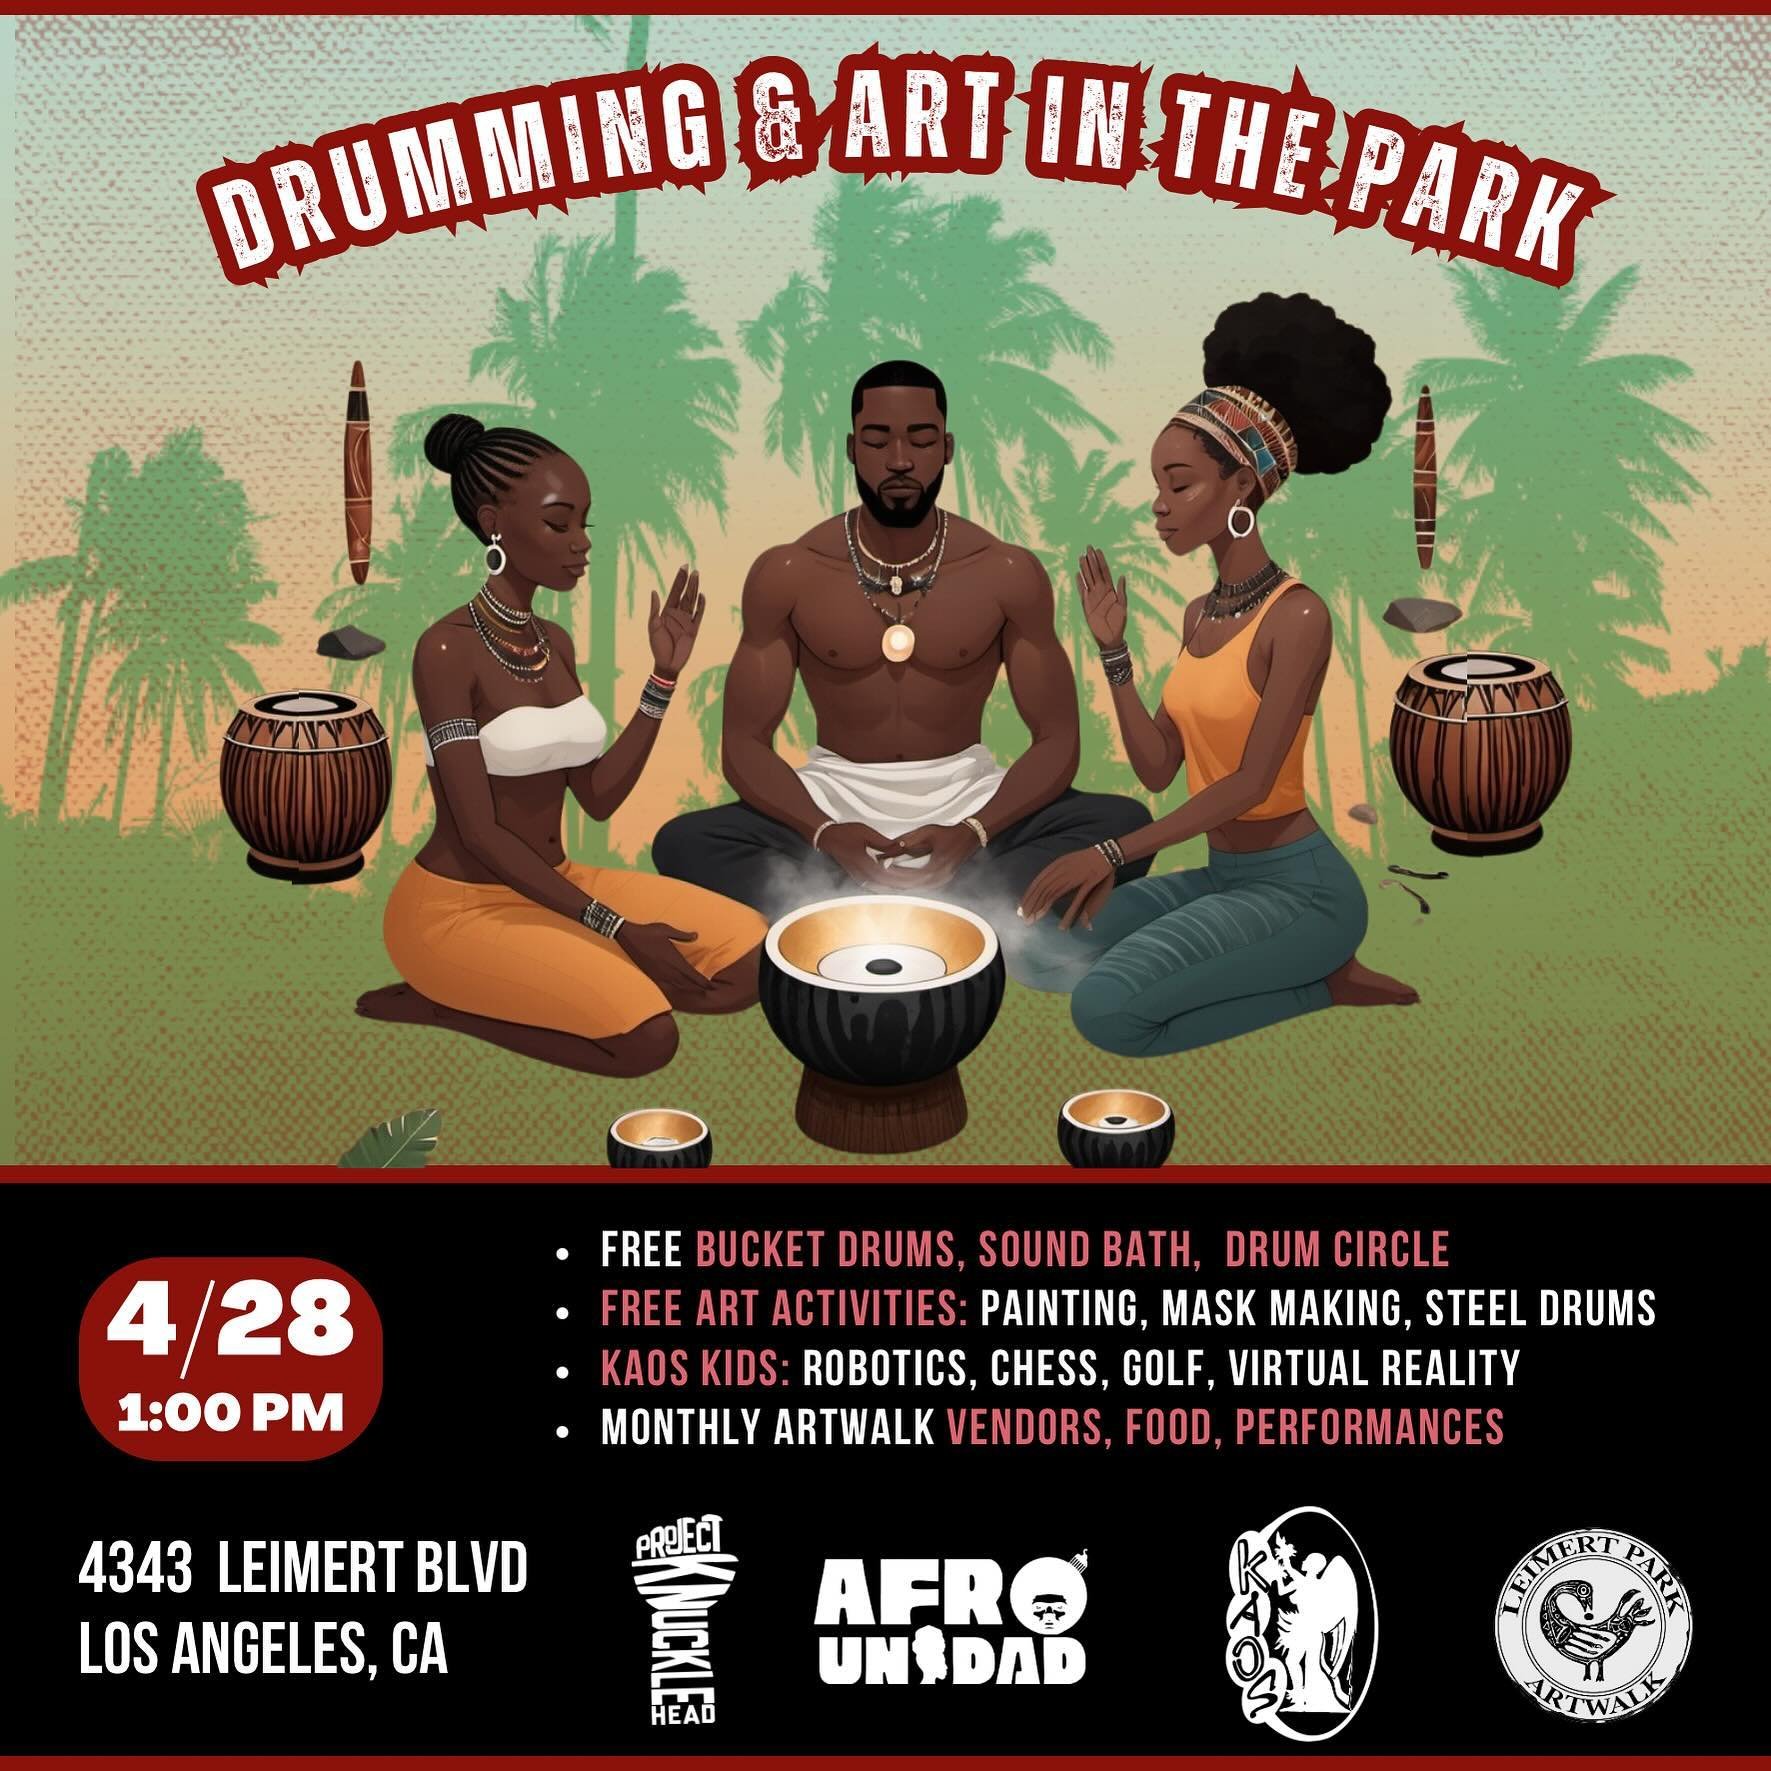 Join us Sunday at the #LeimertParkArtwalk for free art activities (Mask Making, Painting, Drawing), Bucket Drumming, Steel Pans/Vibration Drums, and a Sound Bath experience! We&rsquo;ll be in front of the @kaosnetworkz. The monthly artwalk features p